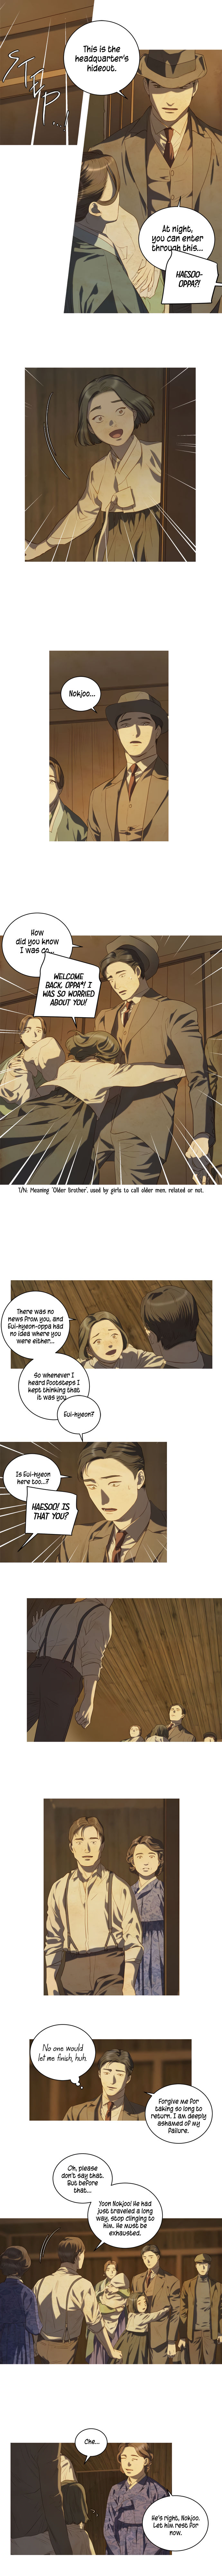 Gorae Byul - The Gyeongseong Mermaid - Chapter 10 Page 6